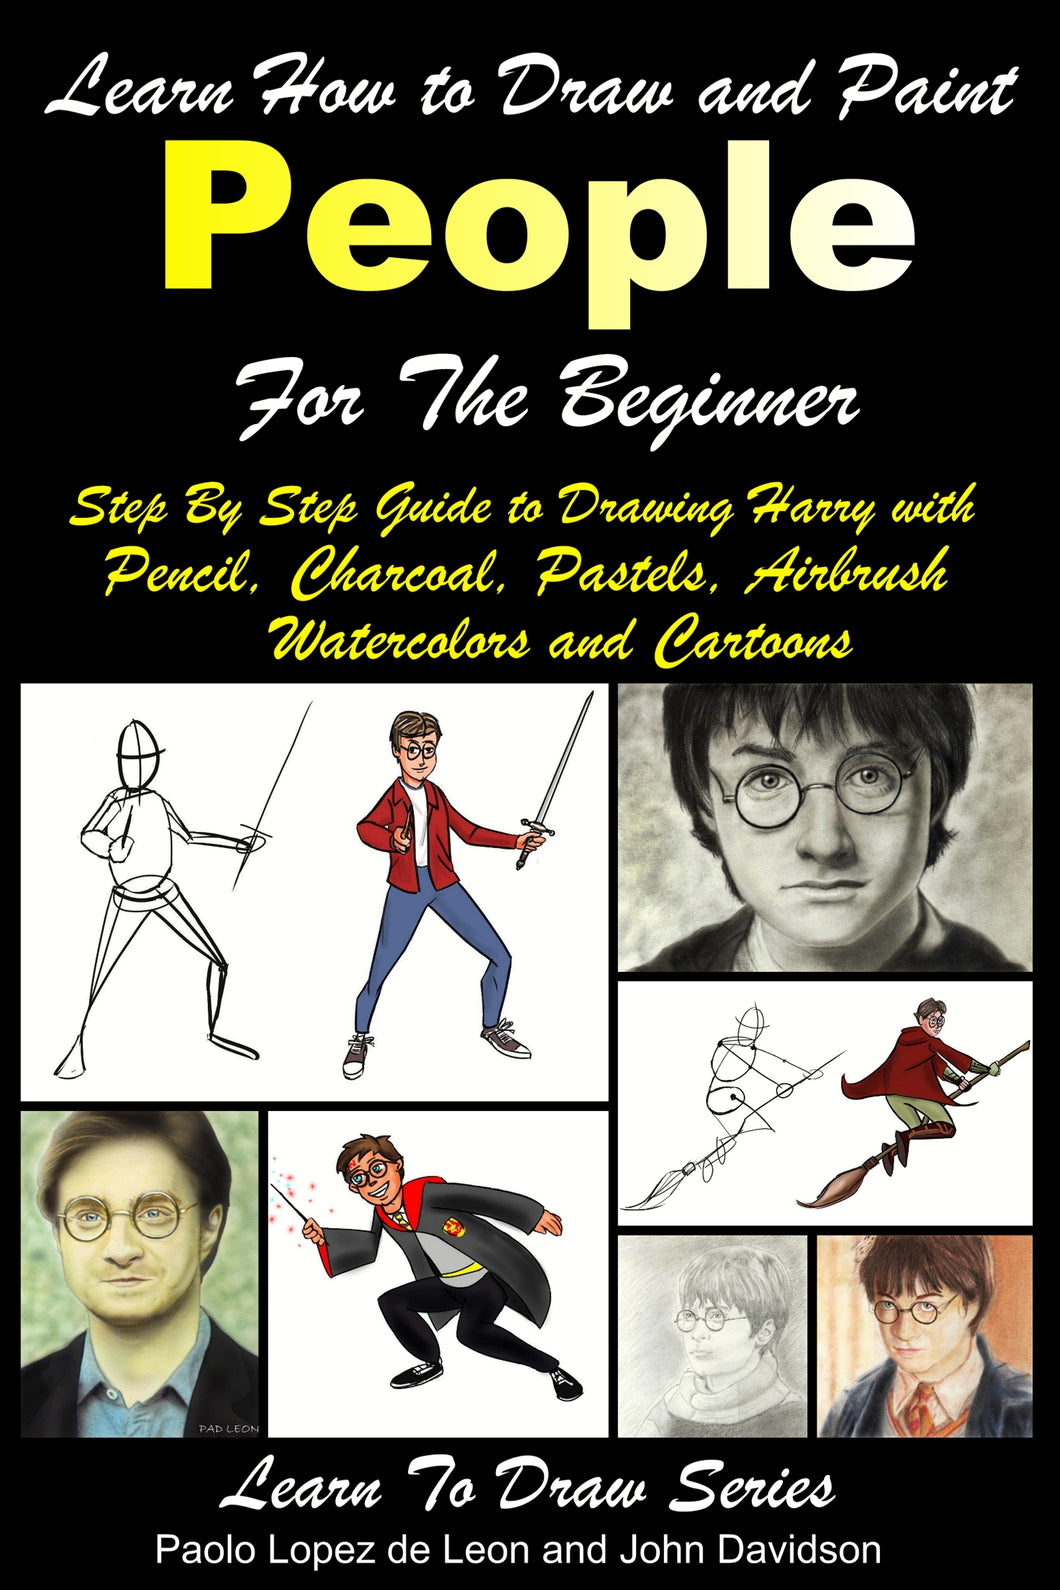 Learn How to Draw and Paint People For the Beginner - Step By Step Guide to Drawing Harry with Pencil, Charcoal, Pastels, Airbrush Watercolors and Cartoons